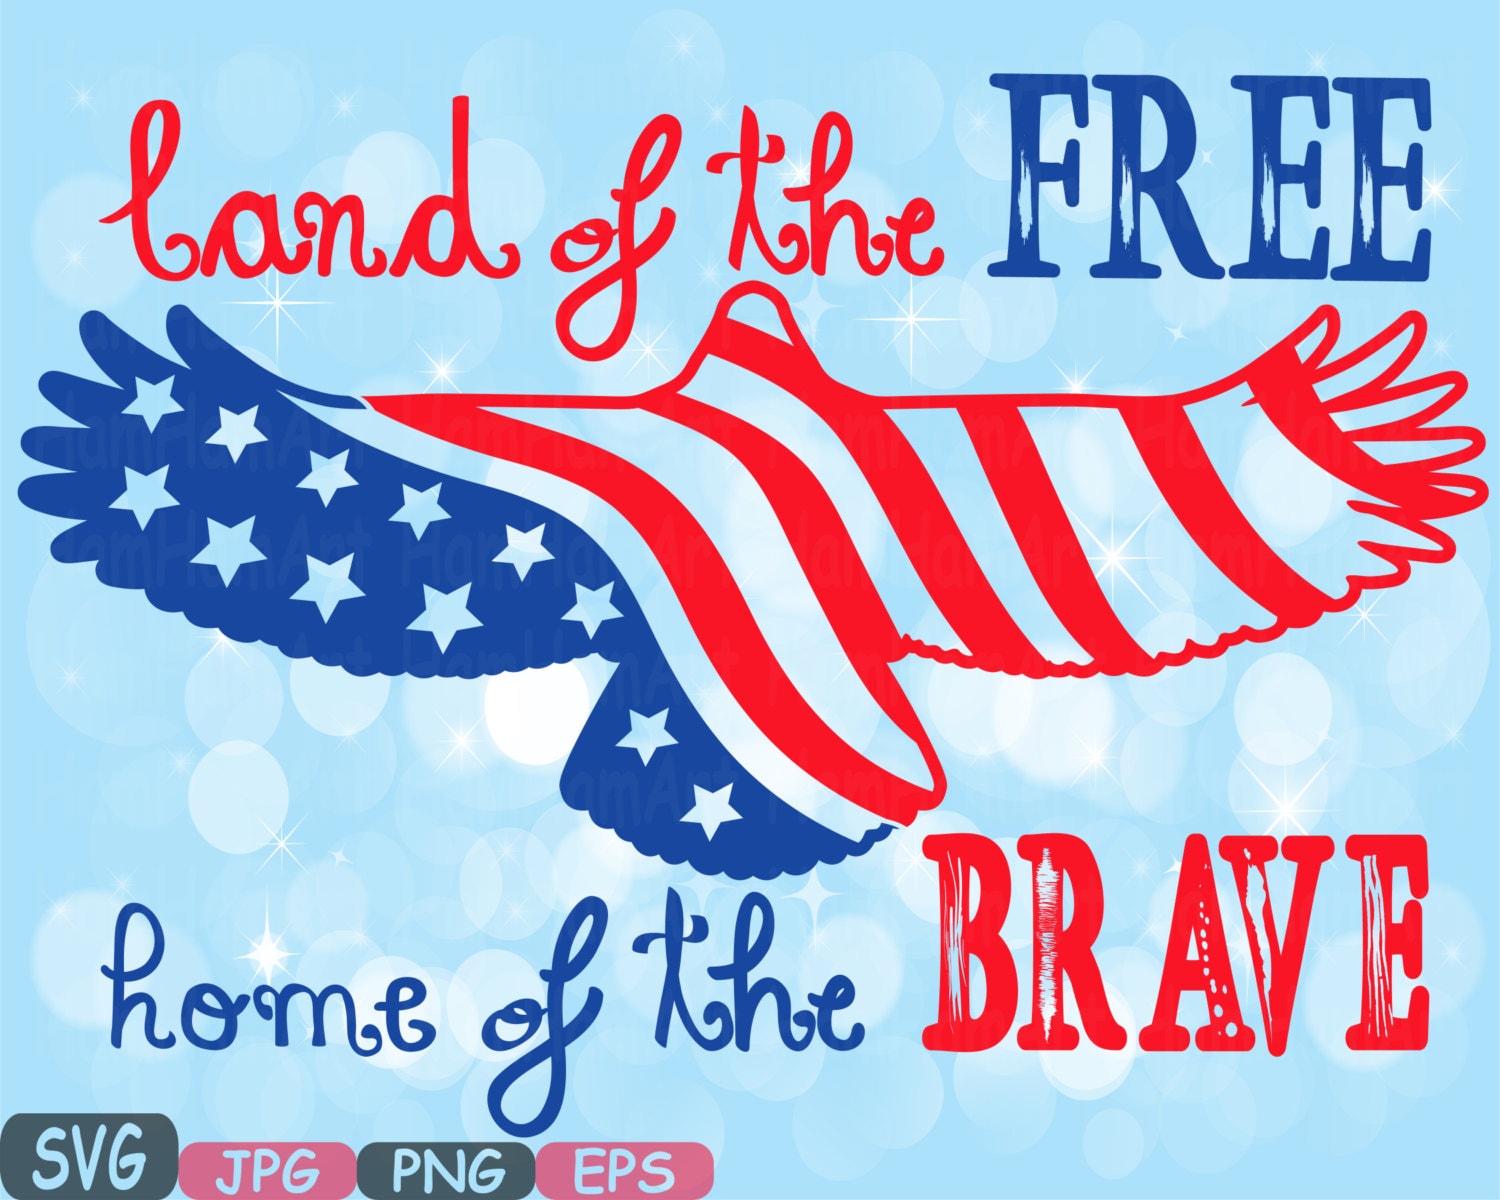 Free Free 149 Svg Home Of The Free Because Of The Brave SVG PNG EPS DXF File